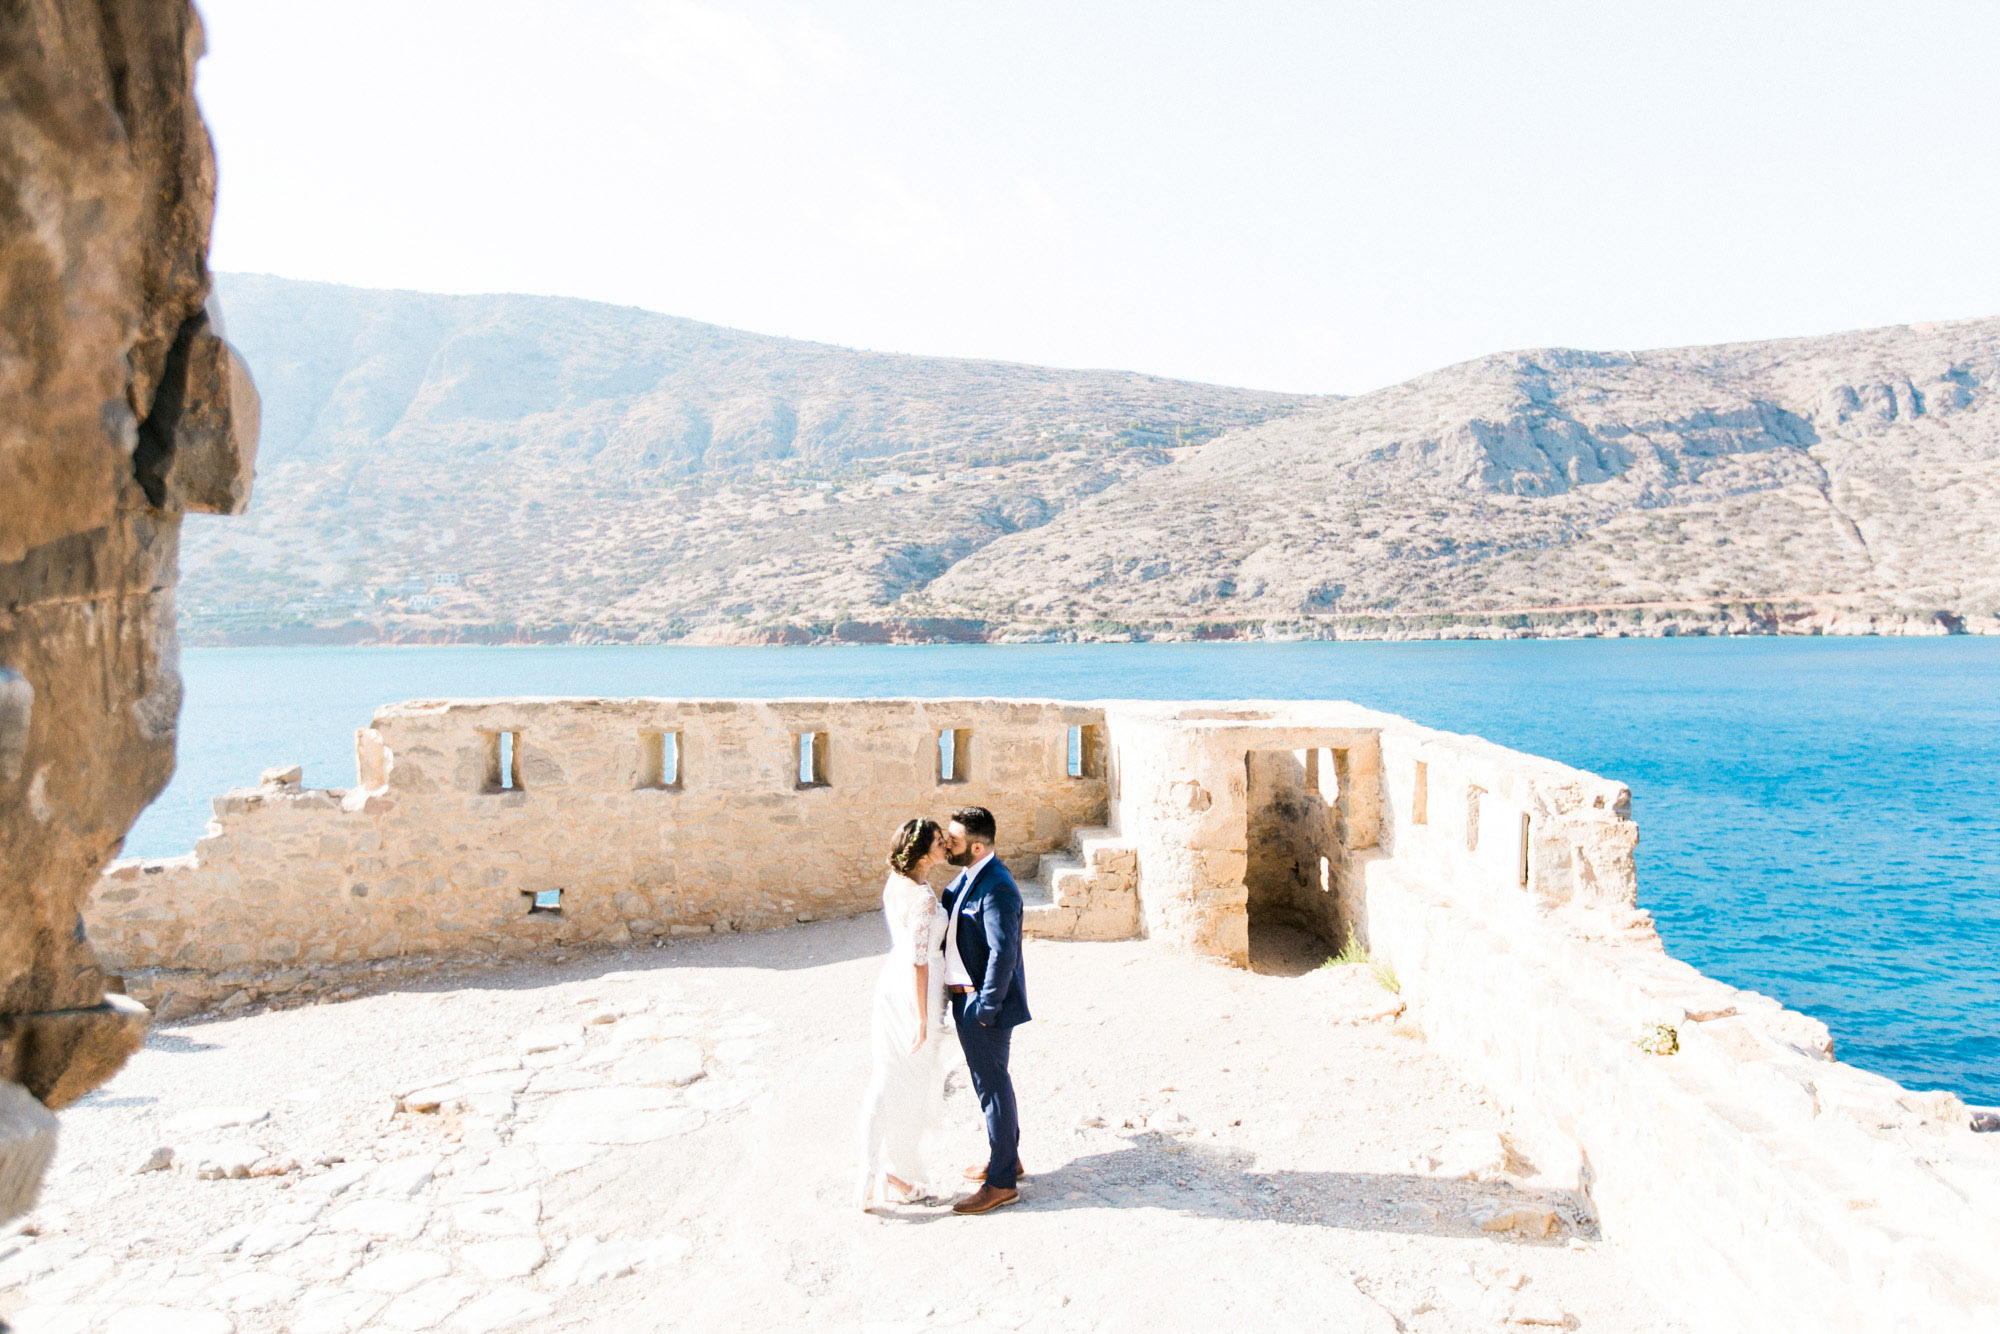 Professional wedding portrait photosession in Crete, bride and groom posing while taking a walk along Spinalonga island, it's historical ruins, church and sites, sea and majestic olive trees in the background.